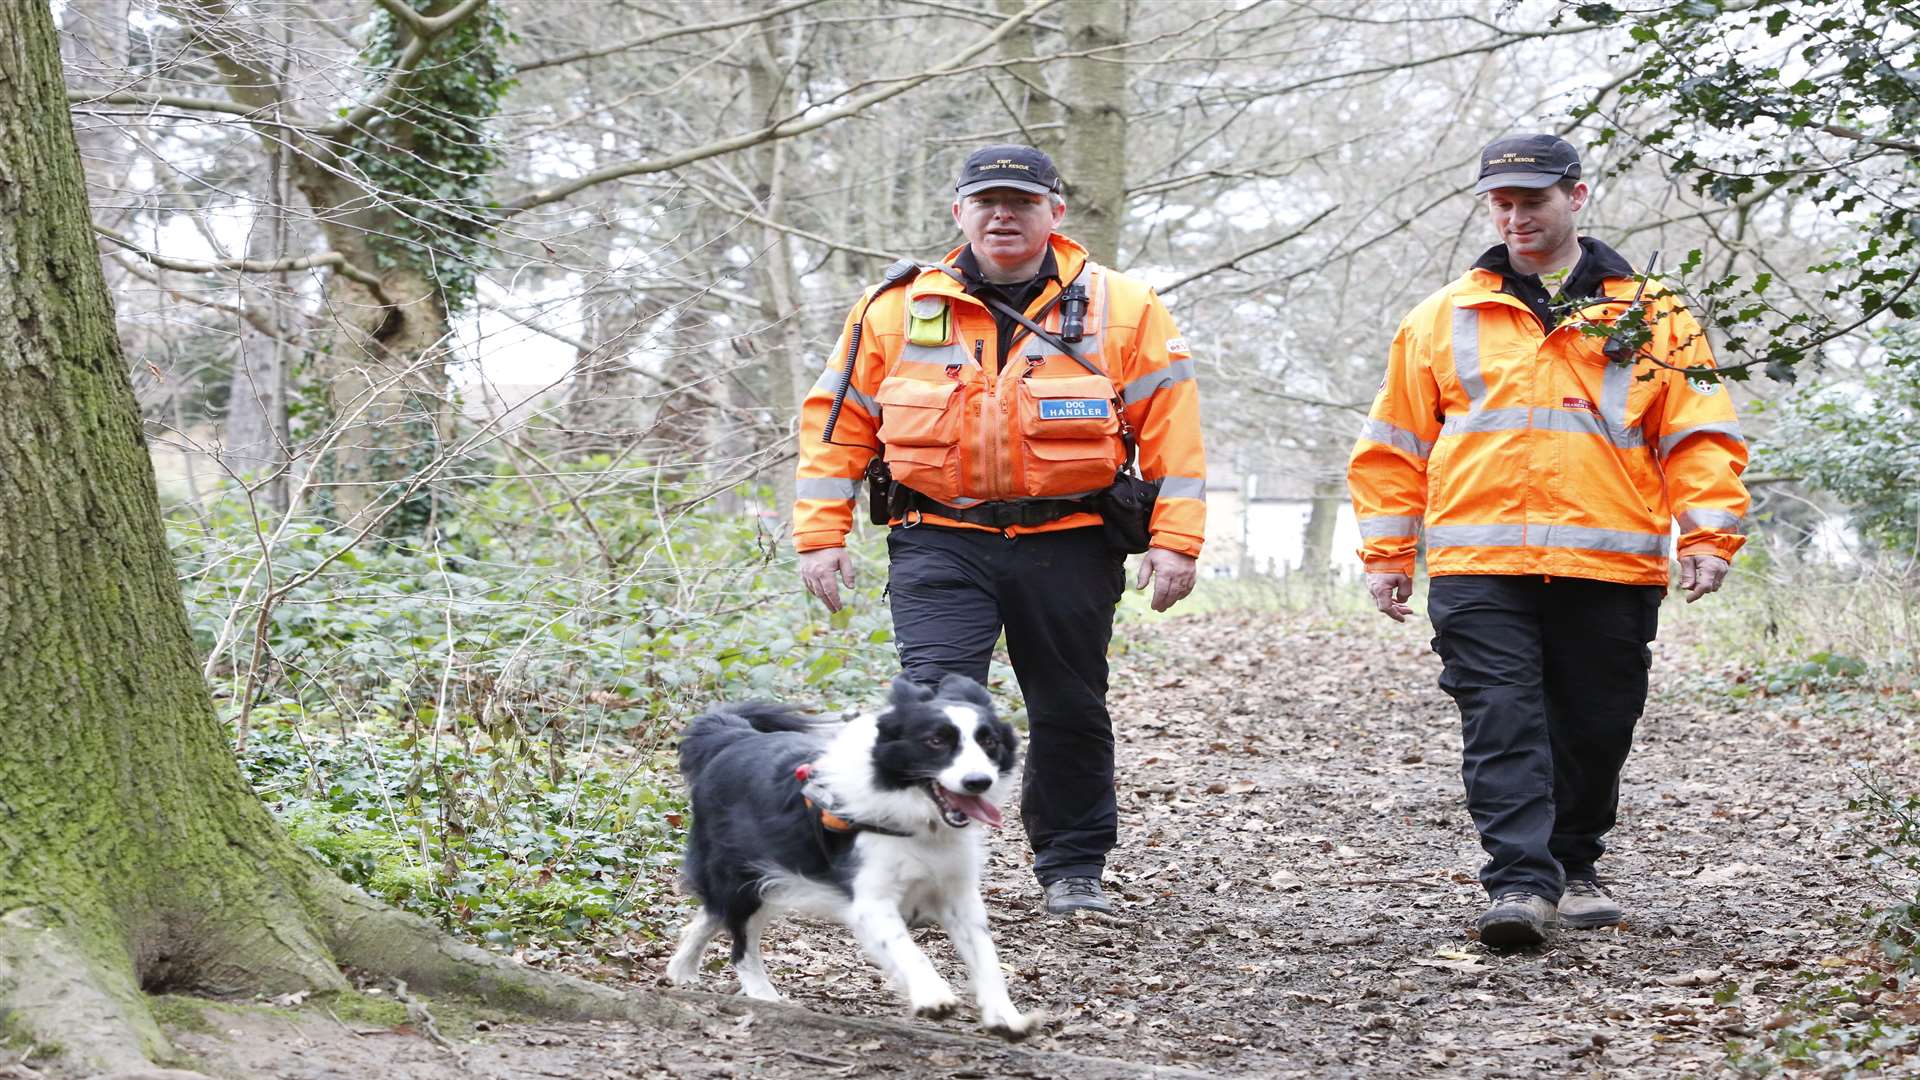 In the wake of the search for Pat Lamb Kent Search and Rescue saw a record number of people wishing to volunteer